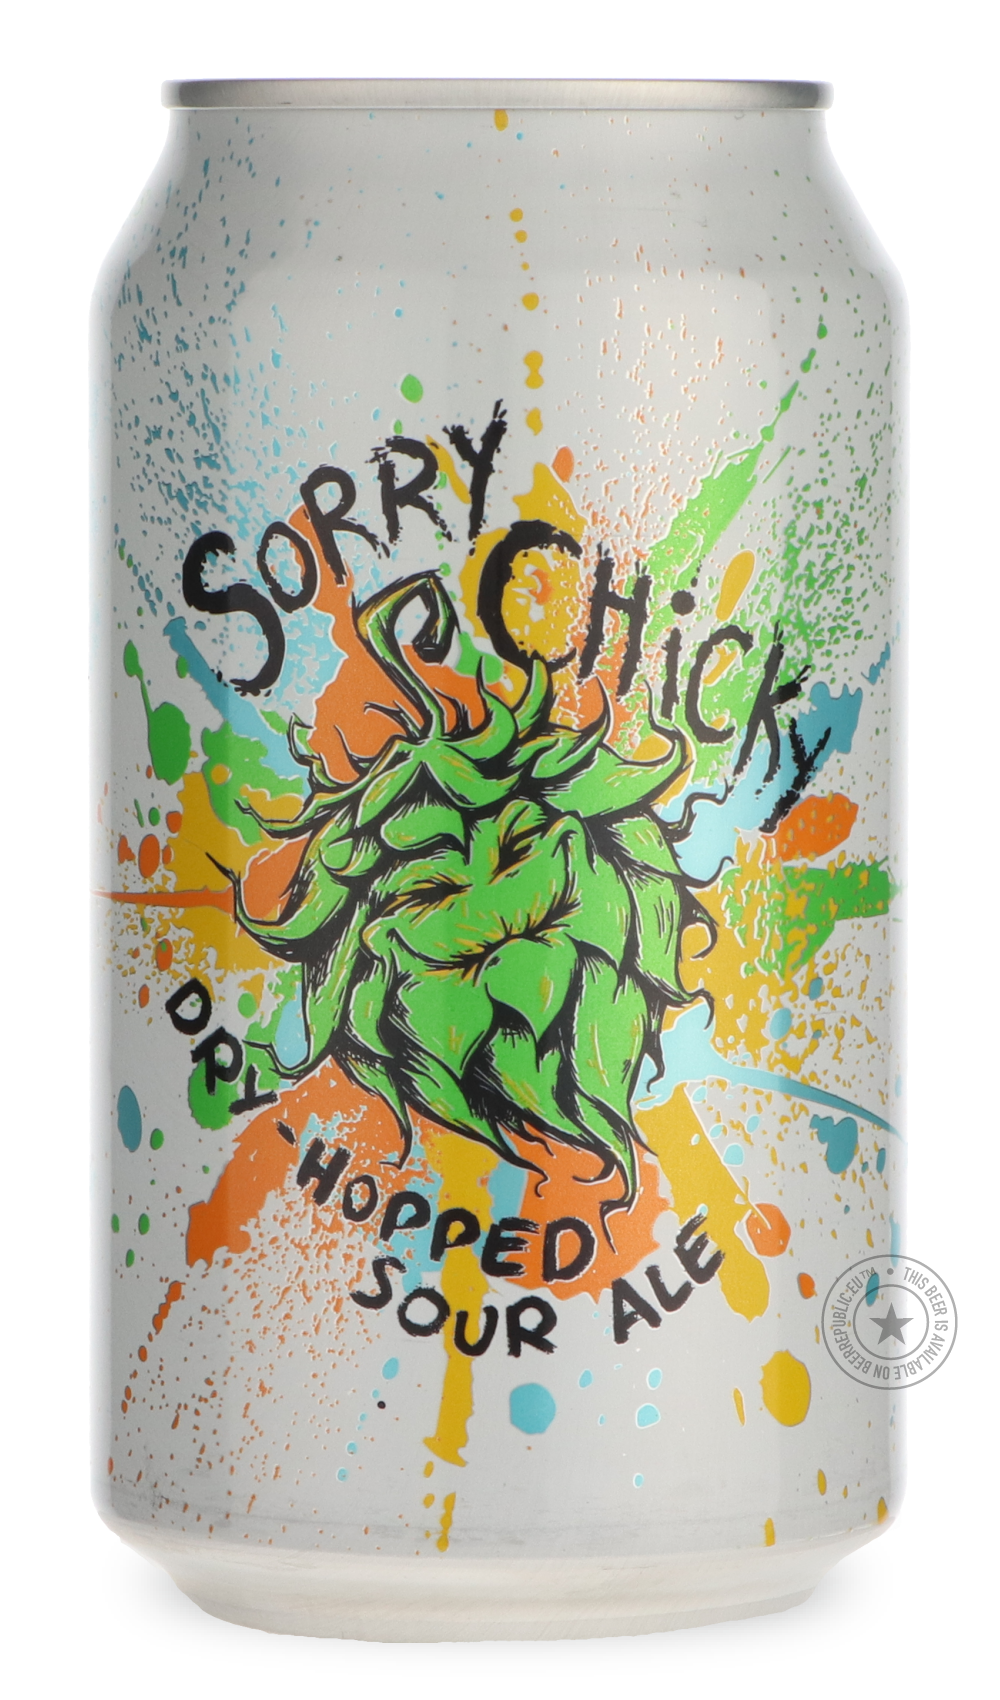 -Burley Oak- Sorry Chicky-Sour / Wild & Fruity- Only @ Beer Republic - The best online beer store for American & Canadian craft beer - Buy beer online from the USA and Canada - Bier online kopen - Amerikaans bier kopen - Craft beer store - Craft beer kopen - Amerikanisch bier kaufen - Bier online kaufen - Acheter biere online - IPA - Stout - Porter - New England IPA - Hazy IPA - Imperial Stout - Barrel Aged - Barrel Aged Imperial Stout - Brown - Dark beer - Blond - Blonde - Pilsner - Lager - Wheat - Weizen 